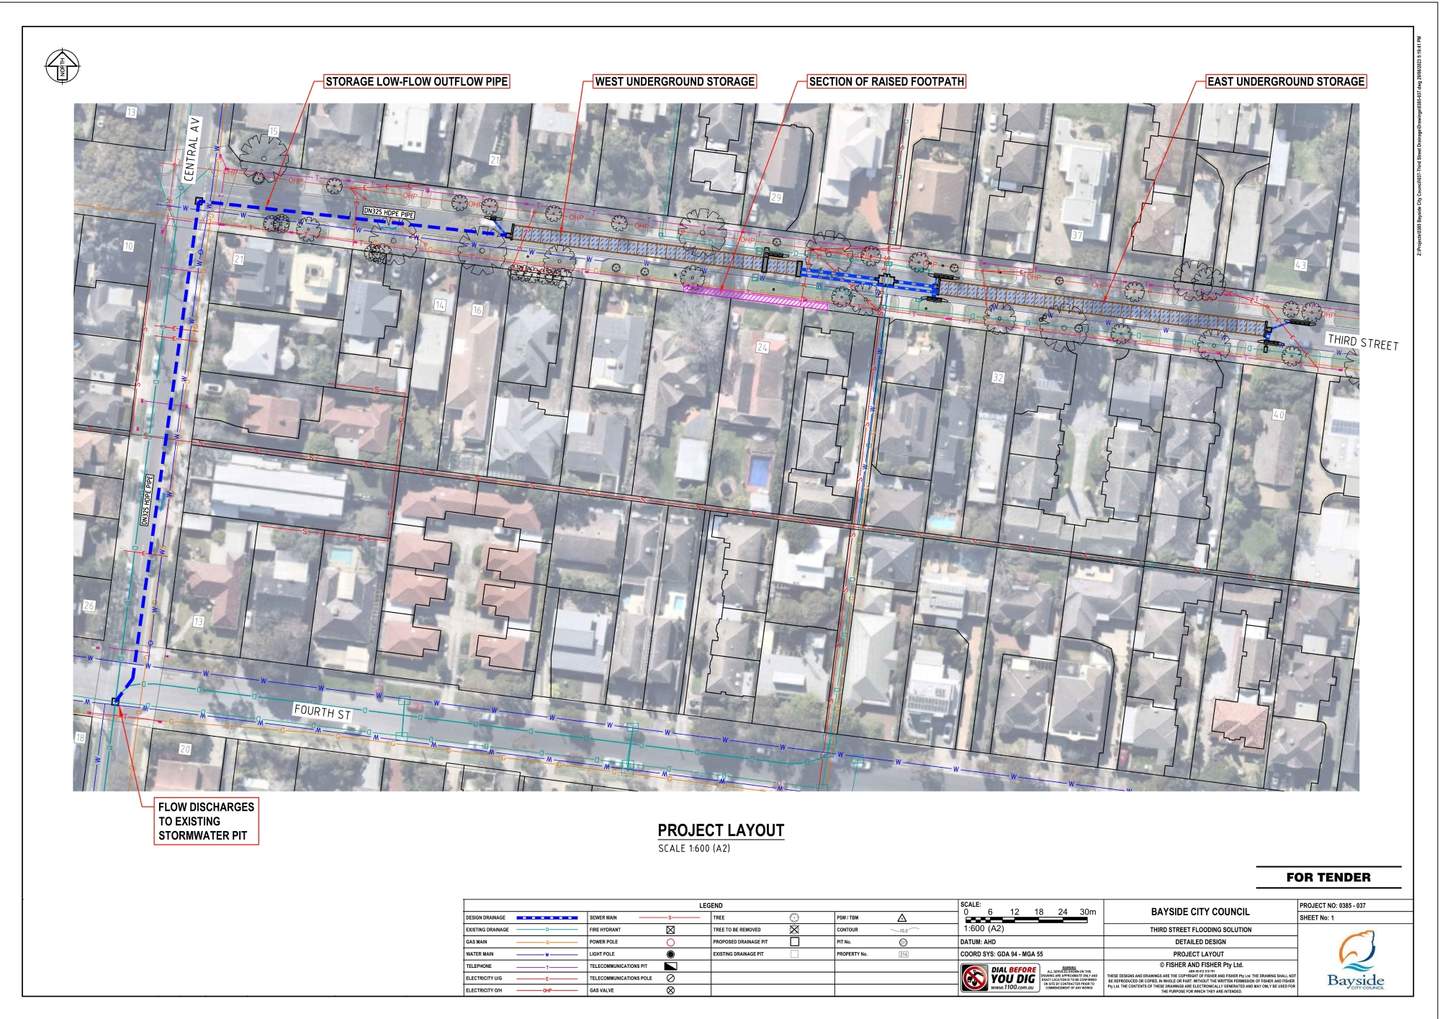 Maps showing drainage plan for Third Street Black Rock